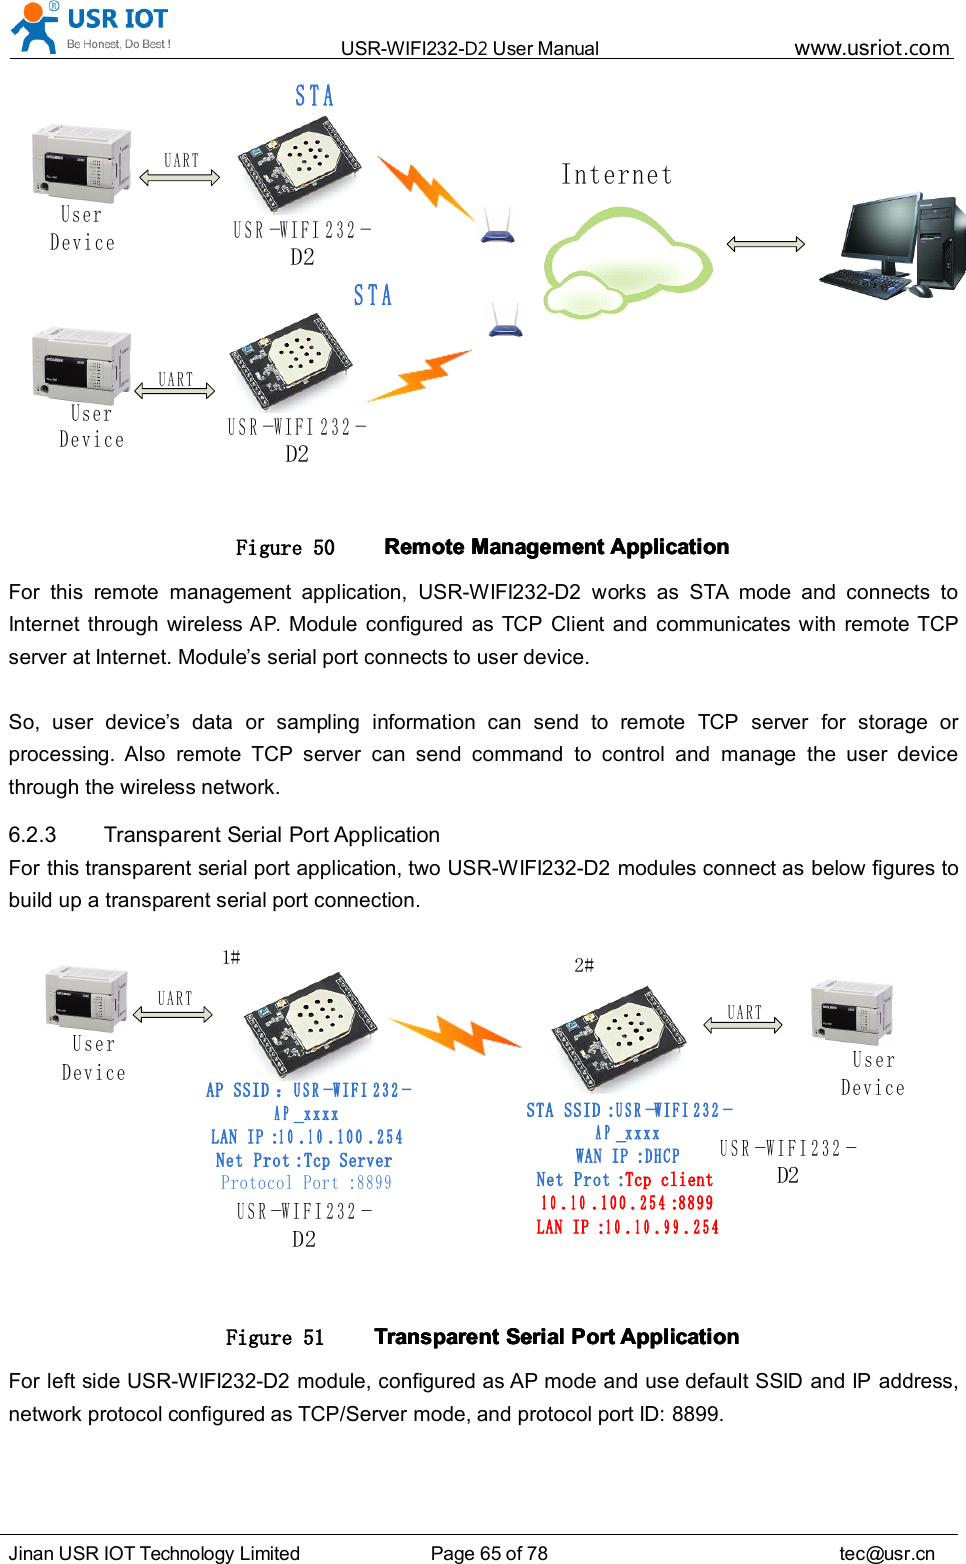 USR-WIFI232- D2 User Manual www.usr iot .comJinan USR IOT Technology Limited Page 65 of 78 tec@usr.cnUSR-WIFI232-D 2STAUARTUSR-WIFI232-D 2STAUARTInternetUser DeviceUser DeviceFigure 50 RemoteRemoteRemoteRemote ManagementManagementManagementManagement ApplicationApplicationApplicationApplicationFor this remote management application, USR-WIFI232-D2 works as STA mode and connects toInternet through wirelessAP.Module configured as TCP Client and communicates with remote TCPserver at Internet. Module ’ s serial port connects to user device.So, user device ’ s data or sampling information can send to remote TCP server for storage orprocessing. Also remote TCP server can send command to control and manage the user devicethrough the wireless network.6.2.3 Transparent Serial Port ApplicationFor this transparent serial port application, two USR-WIFI232-D2 modules connect as below figures tobuild up a transparent serial port connection.USR-WIFI232-D 2User DeviceUARTUSR-WIFI232-D 2UARTAP SSID：USR-WIFI232-AP_xxxxLAN IP:10.10.100.254Net Prot:Tcp ServerProtocol Port:8899STA SSID:USR-WIFI232-AP_xxxxWAN IP:DHCPNet Prot:Tcp client10.10.100.254:8899LAN IP:10.10.99.2541 #2 #User DeviceFigure 51 TransparentTransparentTransparentTransparent SerialSerialSerialSerial PortPortPortPort ApplicationApplicationApplicationApplicationFor left side USR-WIFI232-D2 module, configured as AP mode and use default SSID and IP address,network protocol configured as TCP/Server mode, and protocol port ID: 8899.